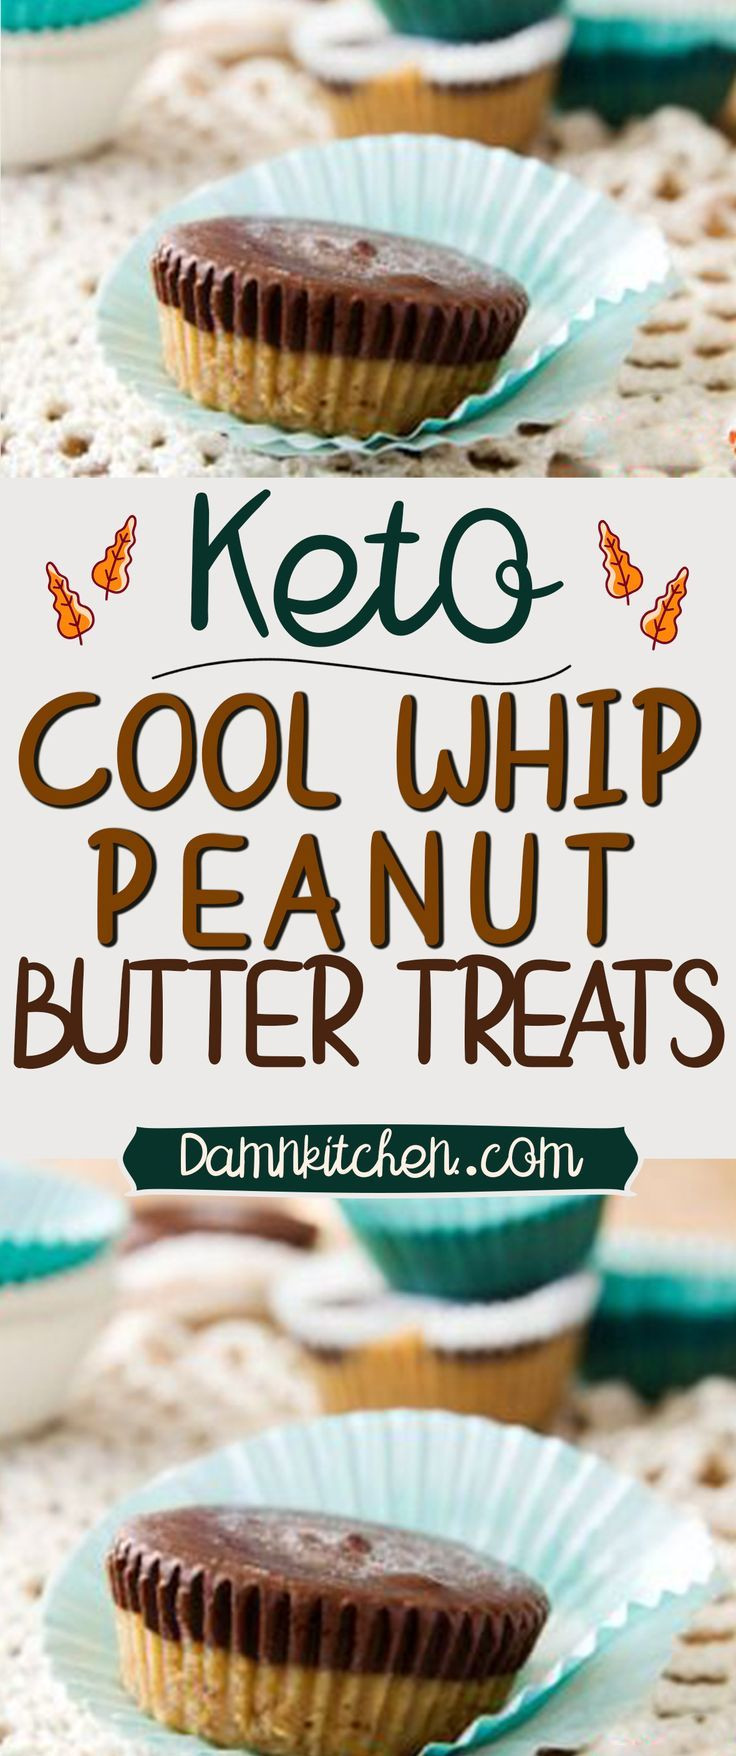 Cool Whip Keto Dessert
 Cool Whip Peanut Butter Treats Low Carb Recipes keto